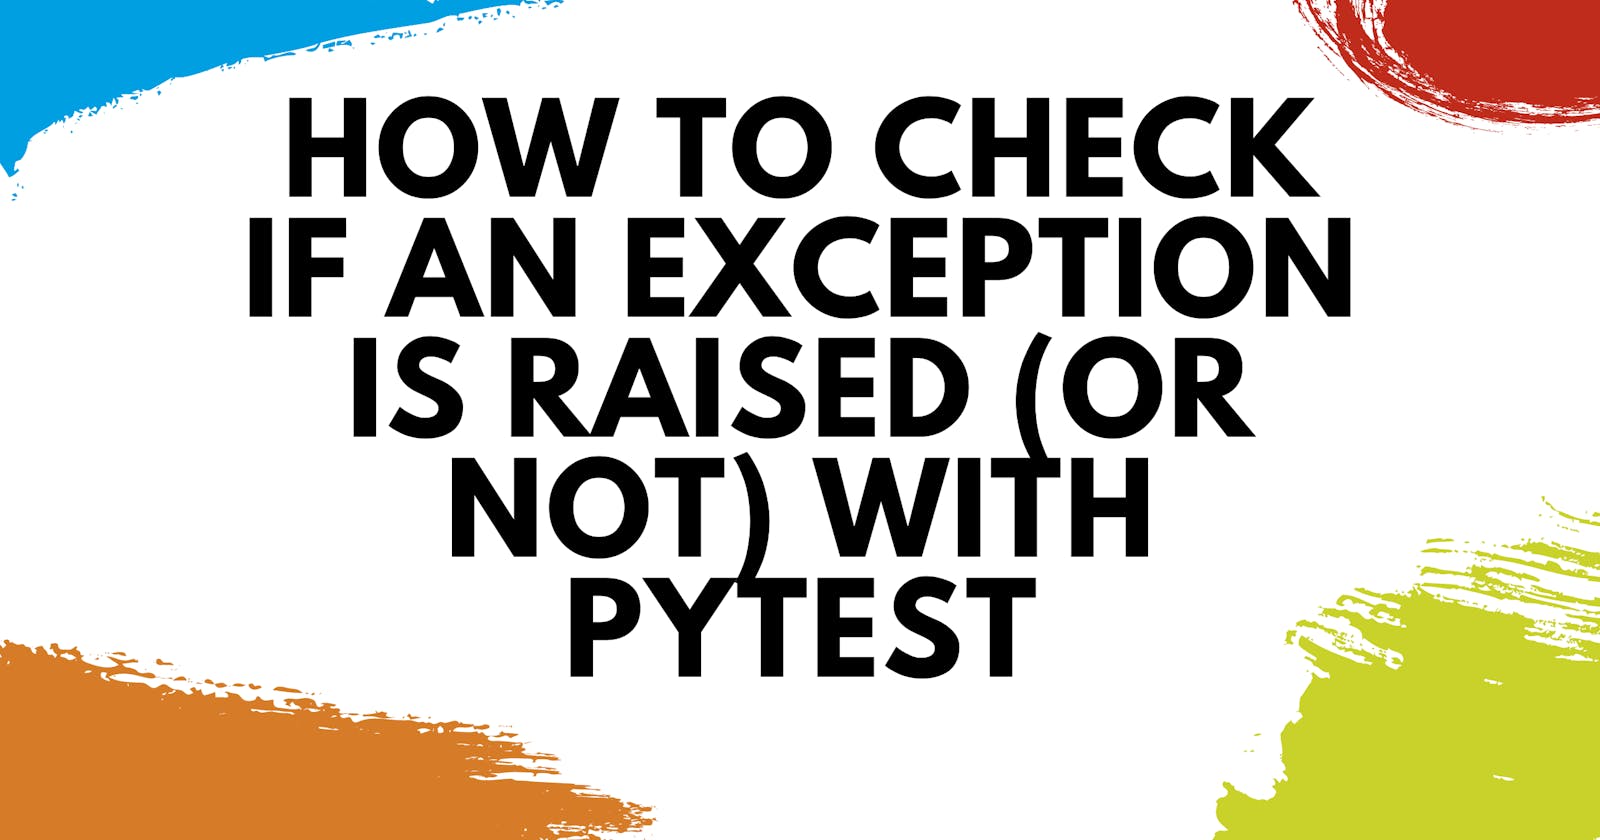 How to Check if an Exception Is Raised (or Not) With pytest